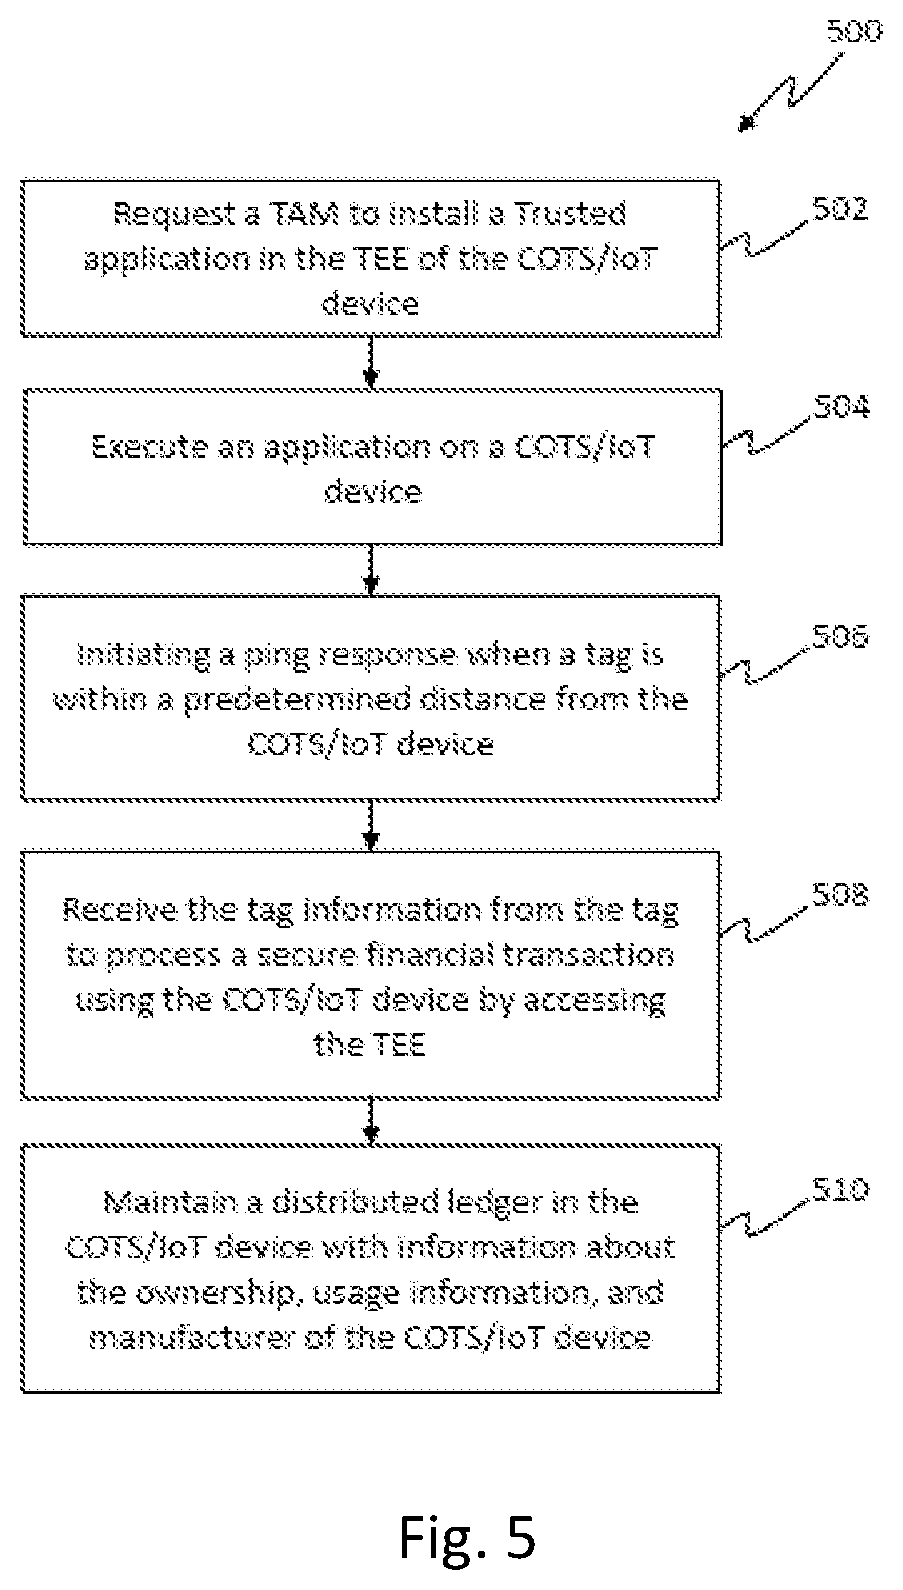 Method for processing a secure financial transaction using a commercial off-the-shelf or an internet of things device